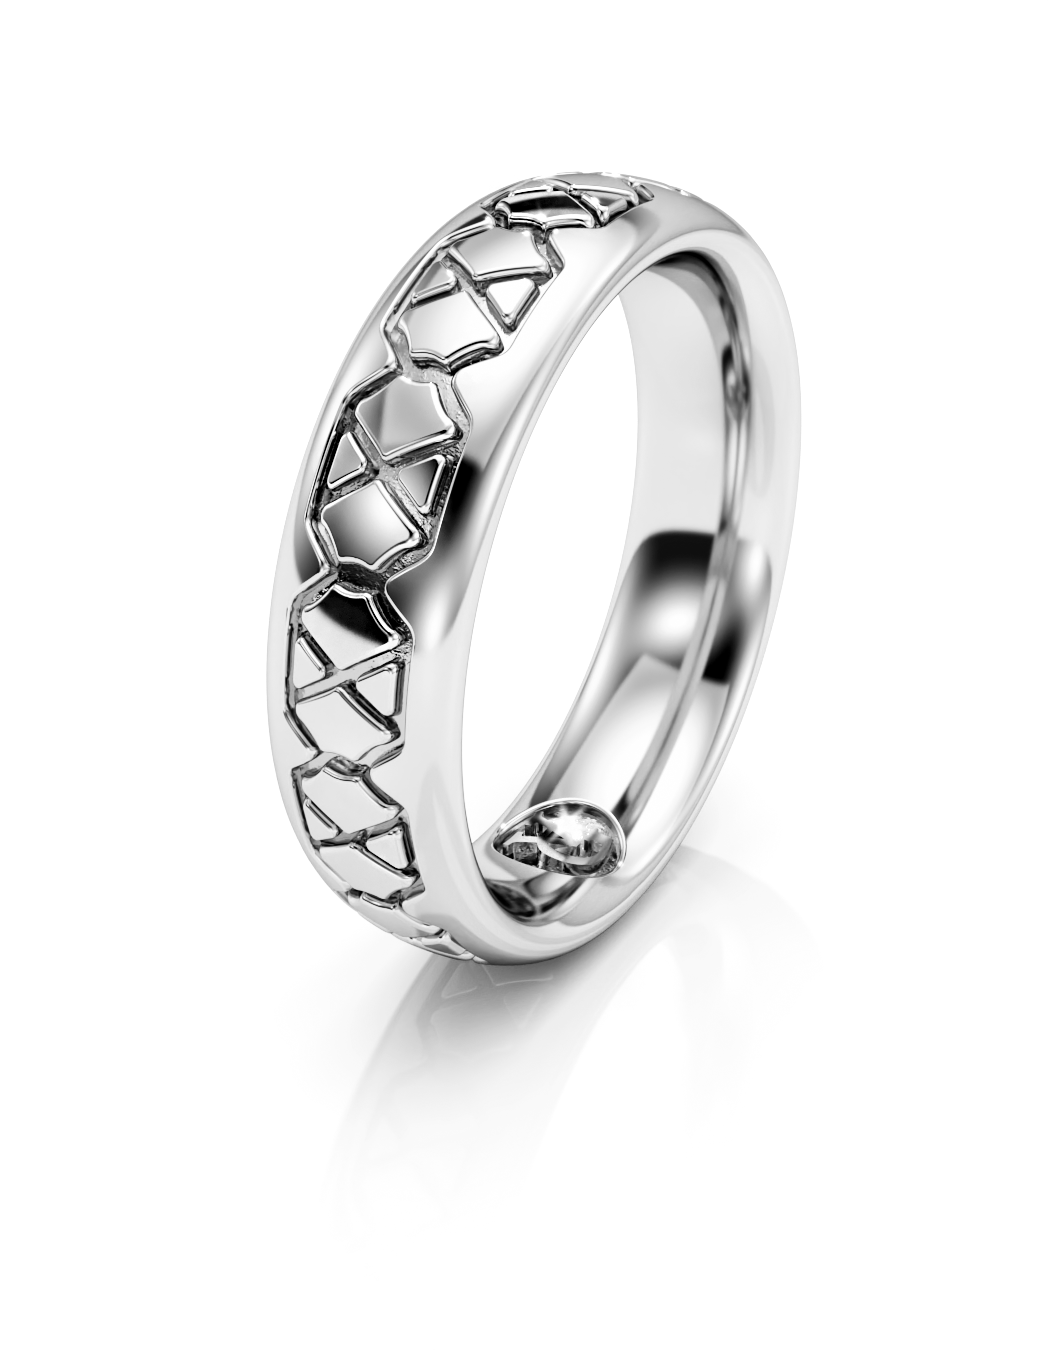 Reflections Ring - 6mm width